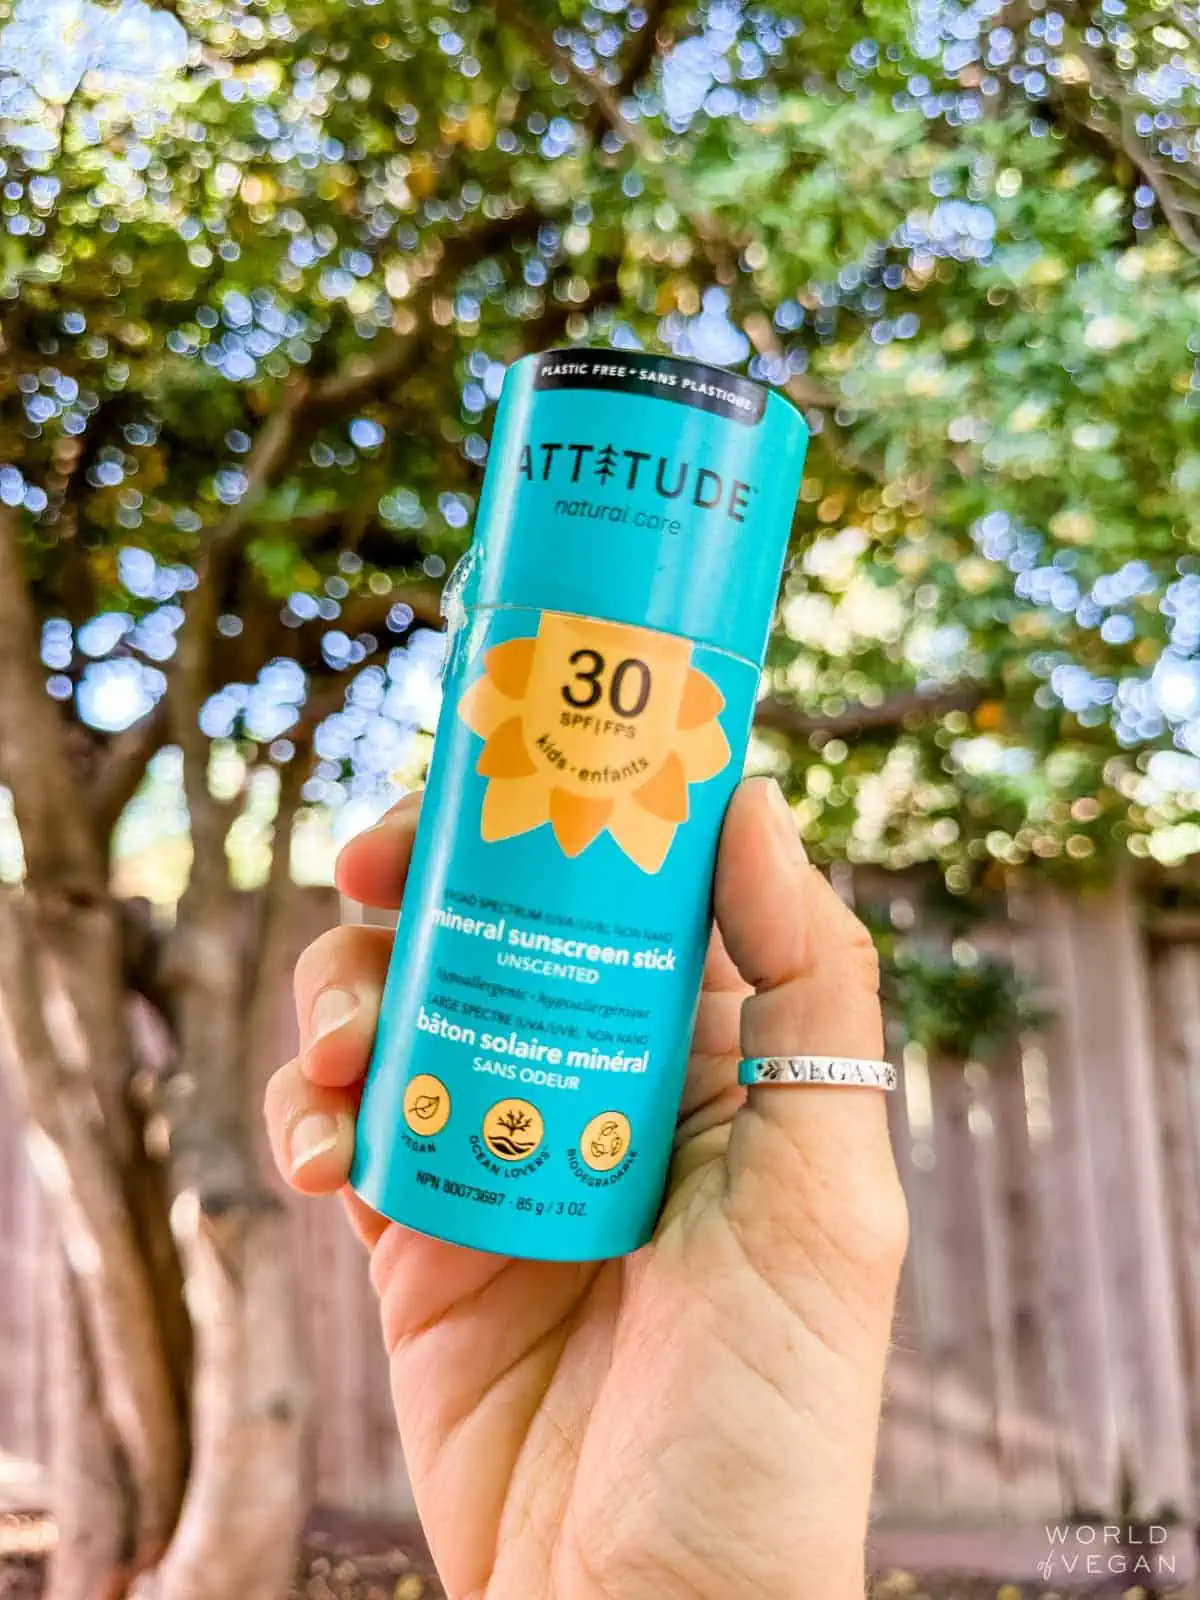 Holding out a cardboard turquoise tube of zero waste compostable plastic-free face sunscreen from Attitude. 